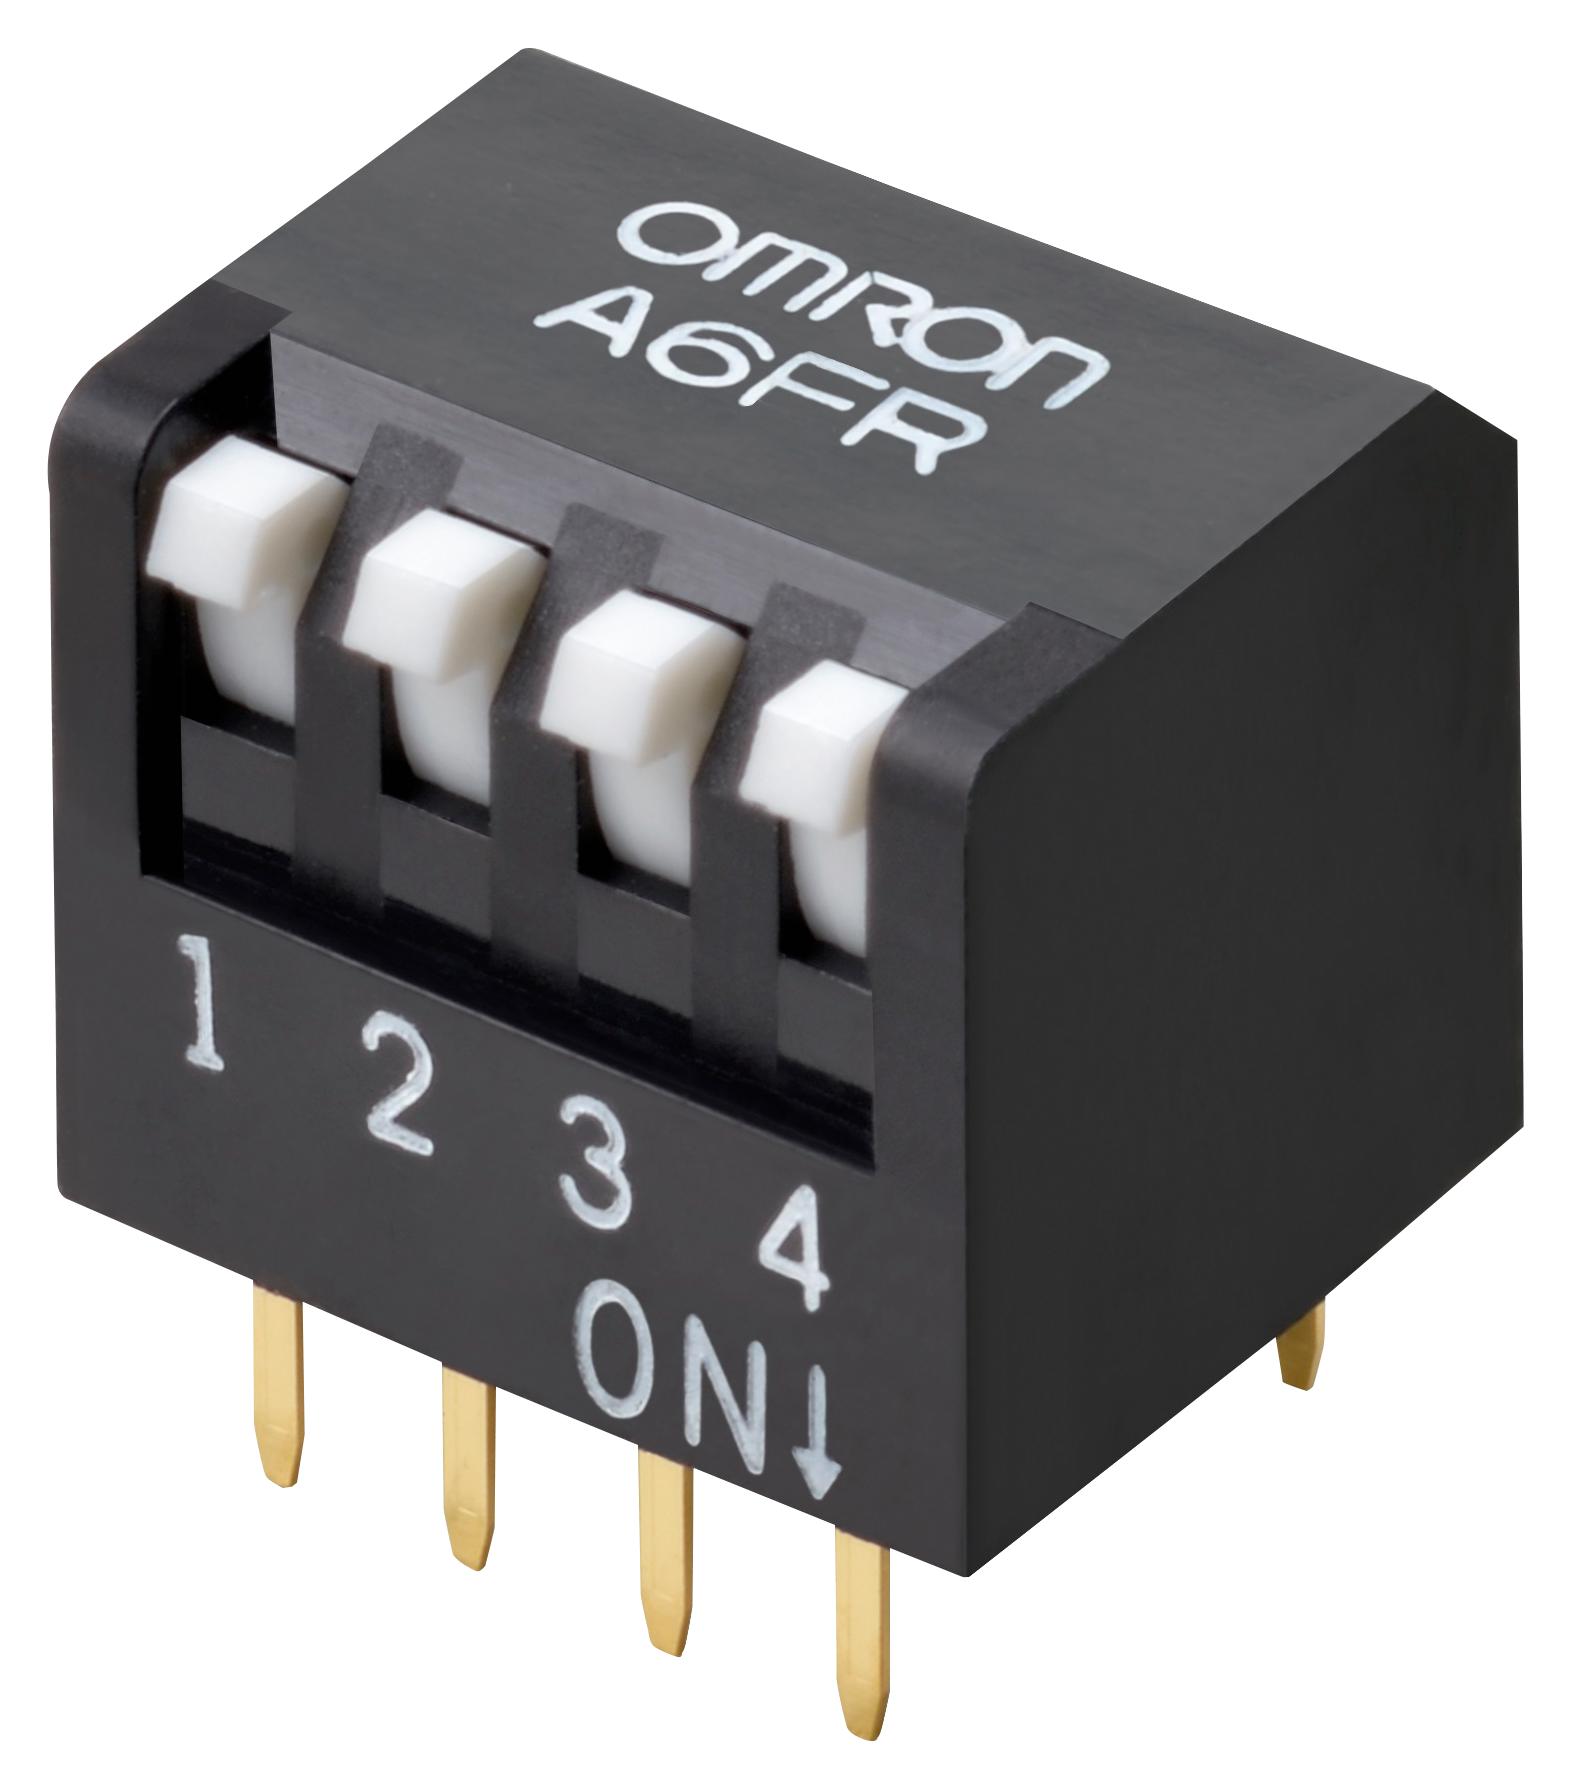 A6FR-6101 DIP SWITCH, 6POS, SPST, PIANO KEY, TH OMRON